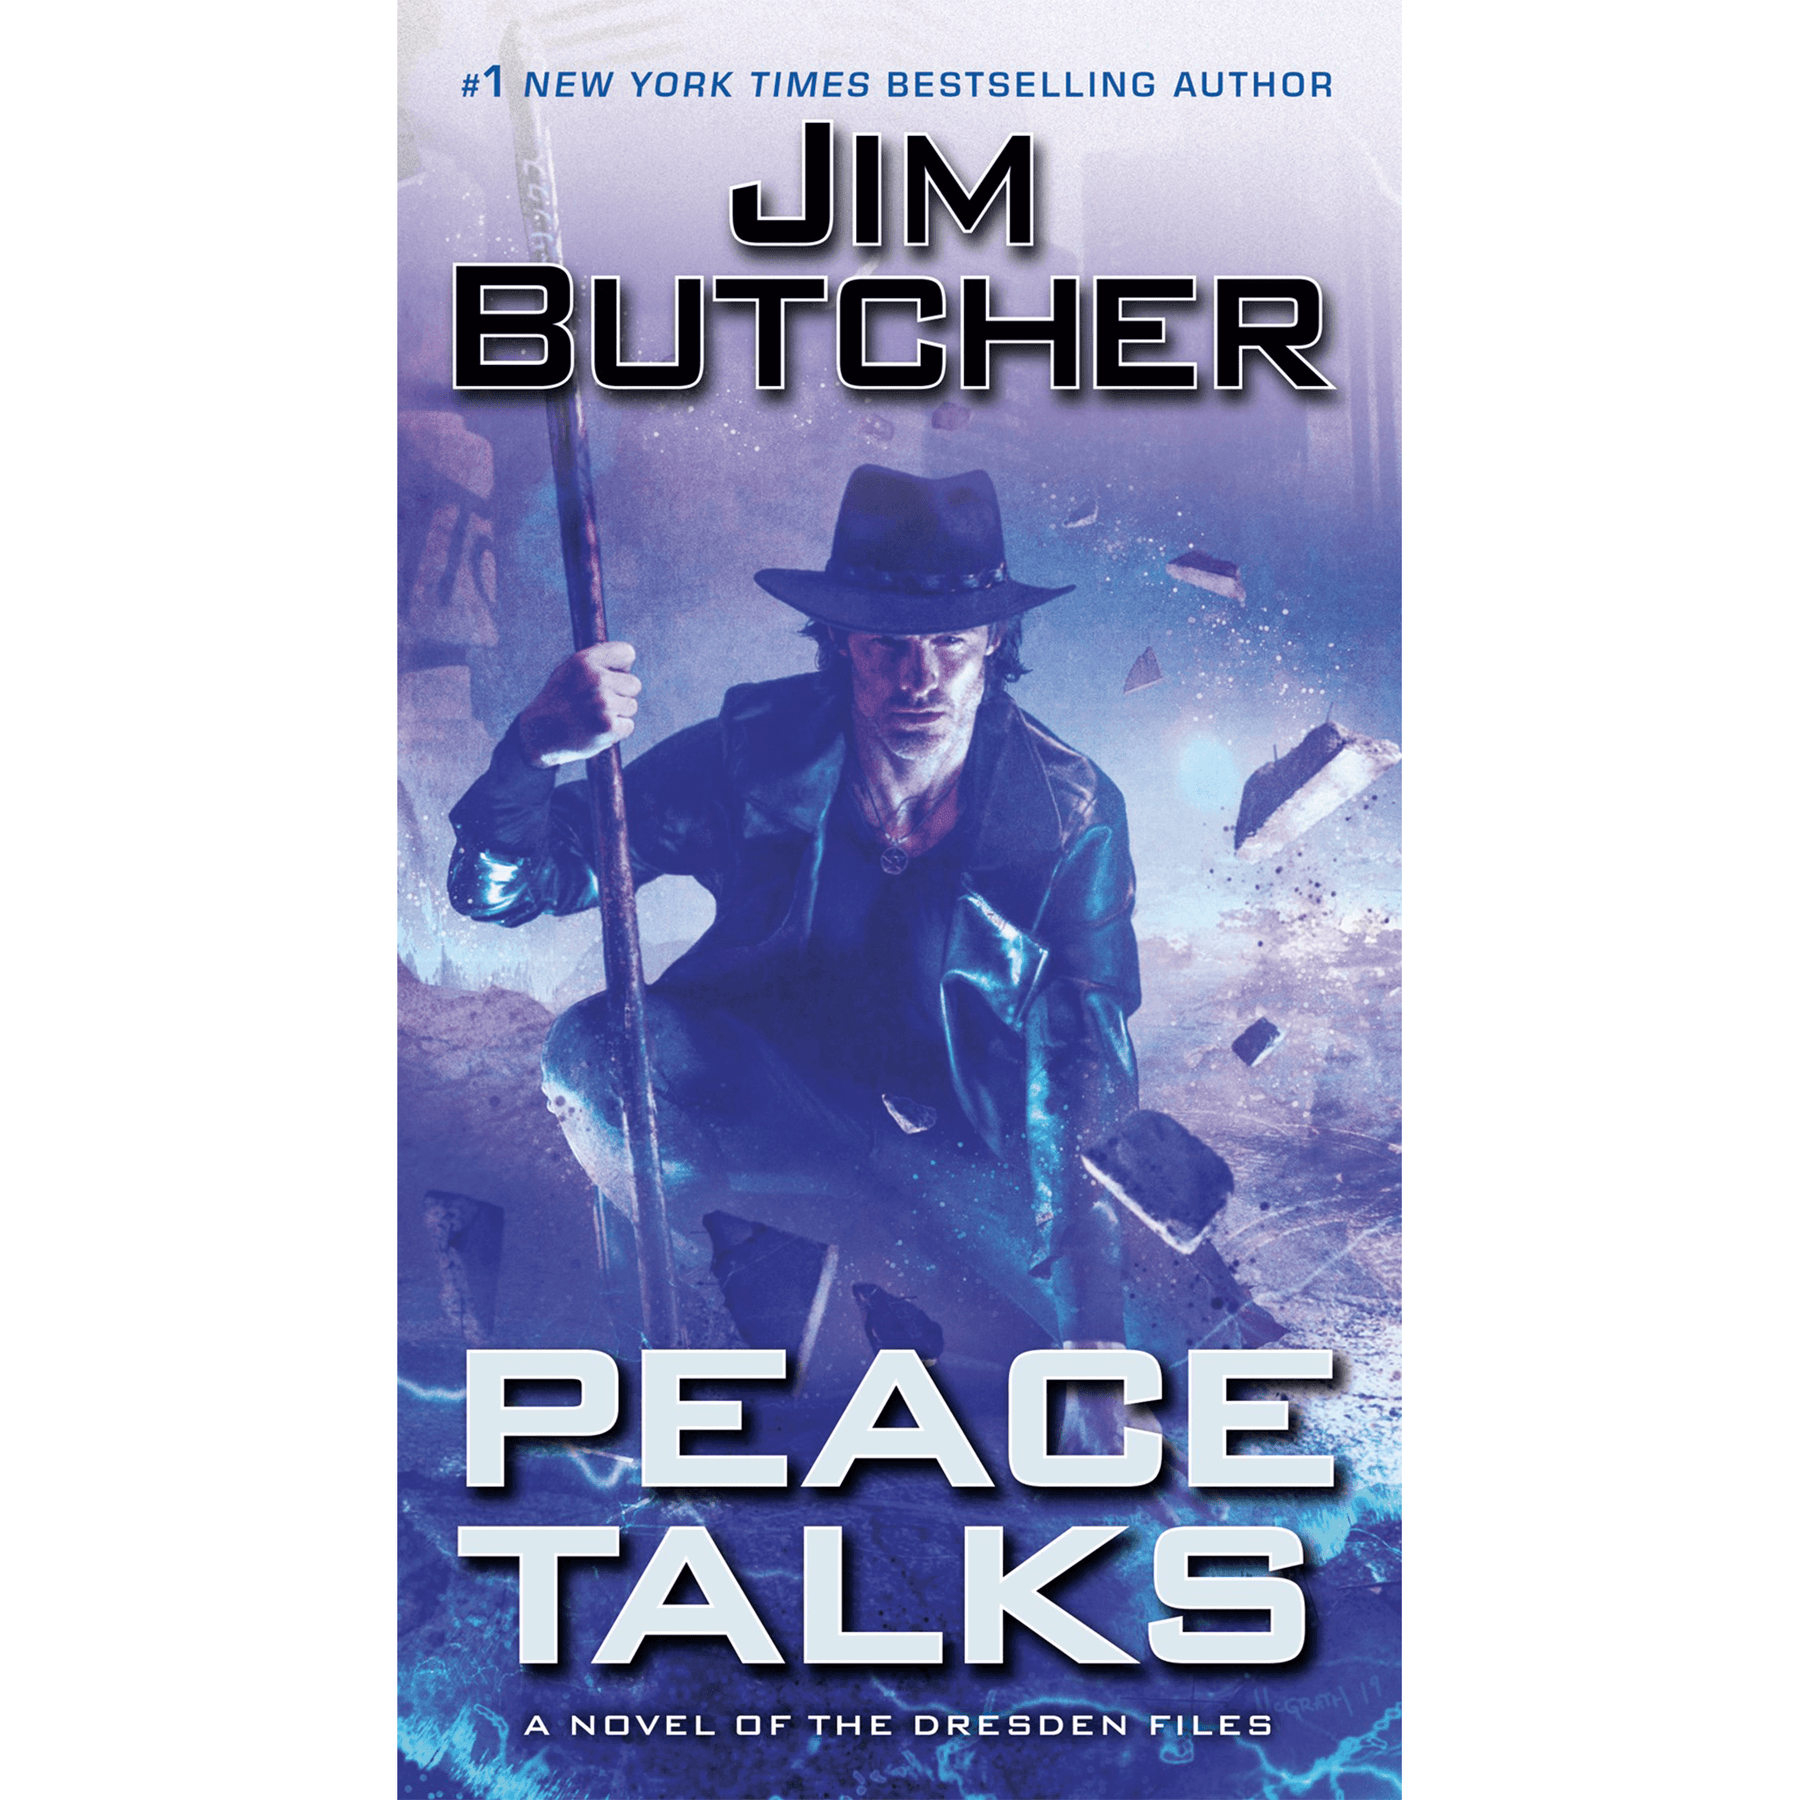 Dresden Files – Barrel of Books and Games